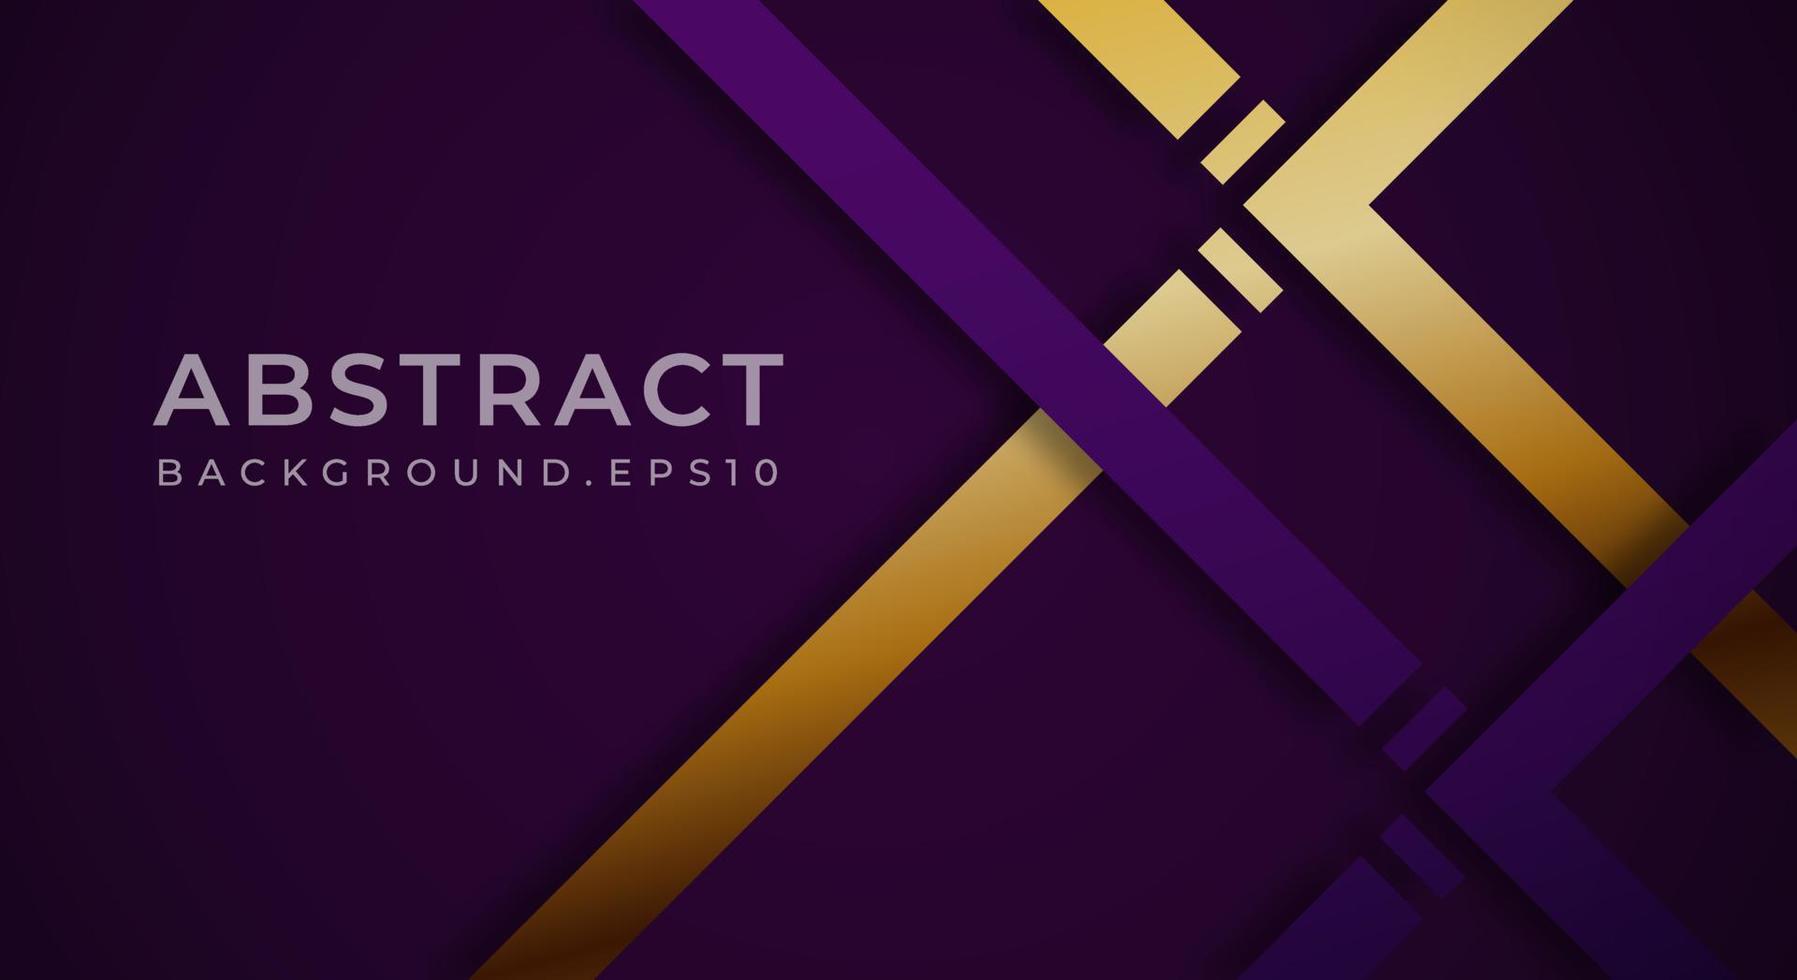 Abstract Dark Purple 3D Background with Gold and Purple Lines Paper Cut Style Textured. Usable for Decorative web layout, Poster, Banner, Corporate Brochure and Seminar Template Design vector